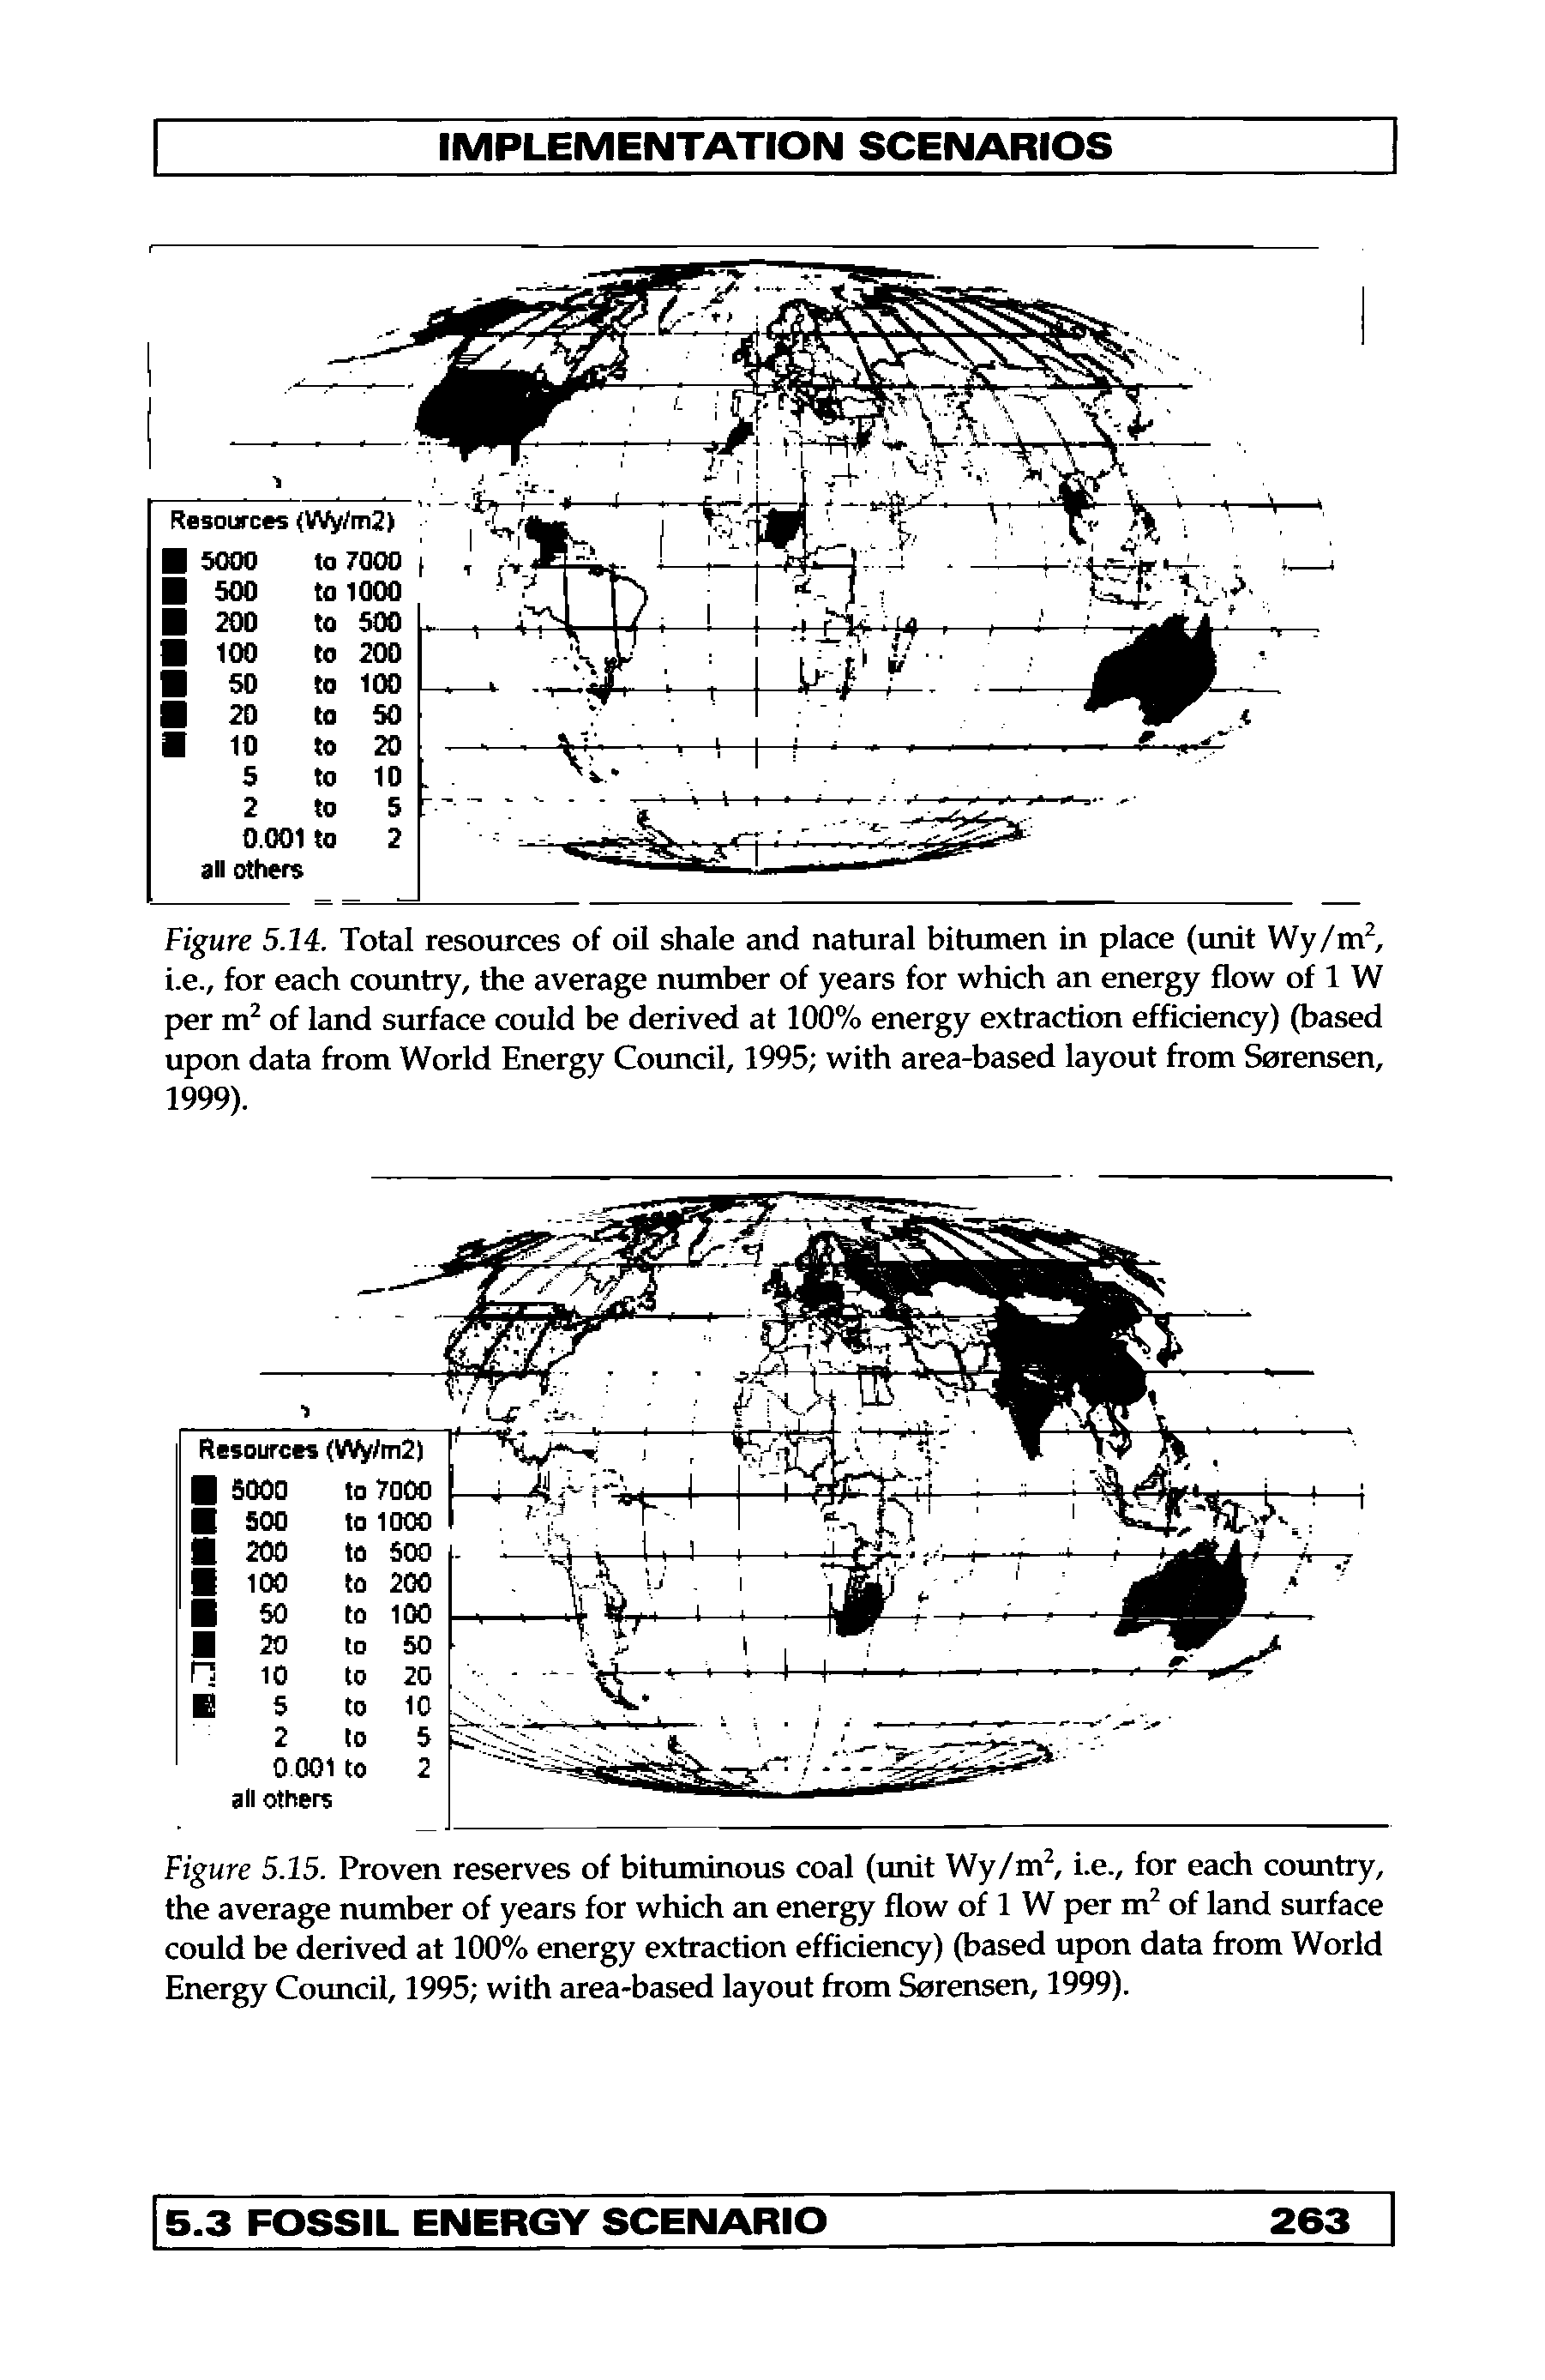 Figure 5.15. Proven reserves of bituminous coal (unit Wy/m i.e., for each cotmtry, the average number of years for which an energy flow of 1 W per m of land surface could be derived at 100% energy extraction efficiency) (based upon data from World Energy Council, 1995 with area-based layout from Sorensen, 1999).